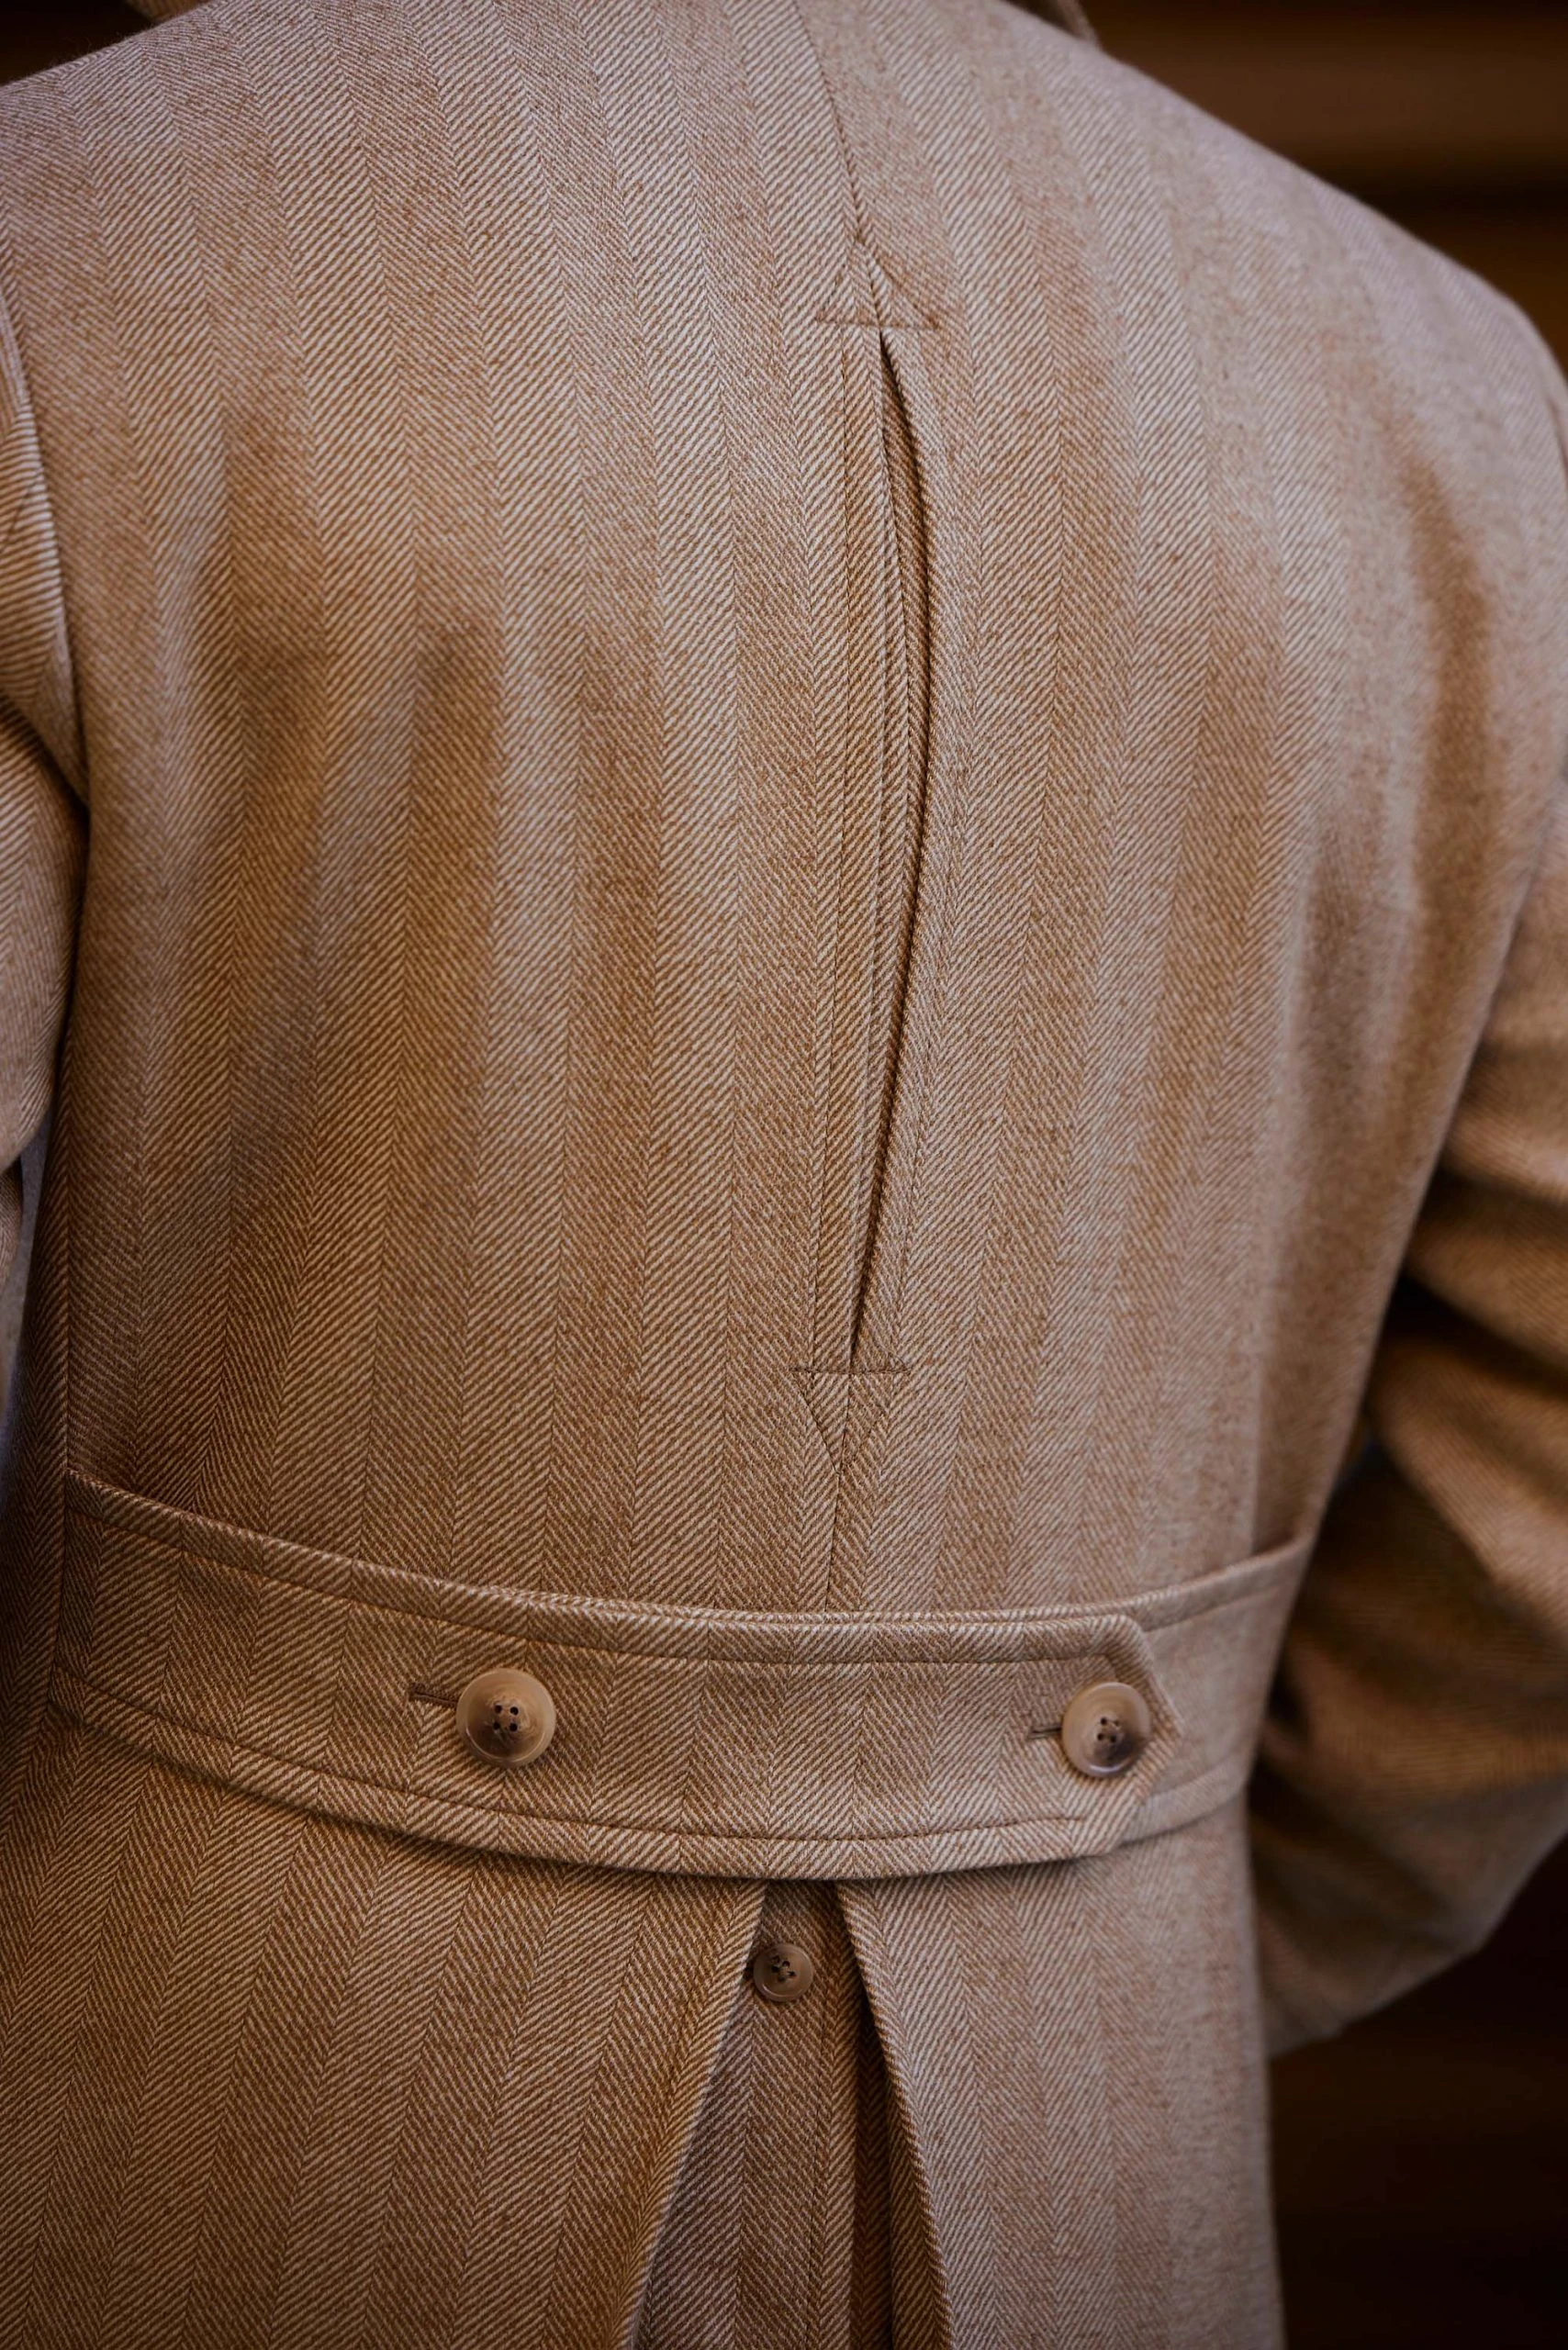 carlos domord at pitti uomo wearing a beige mond overcoat